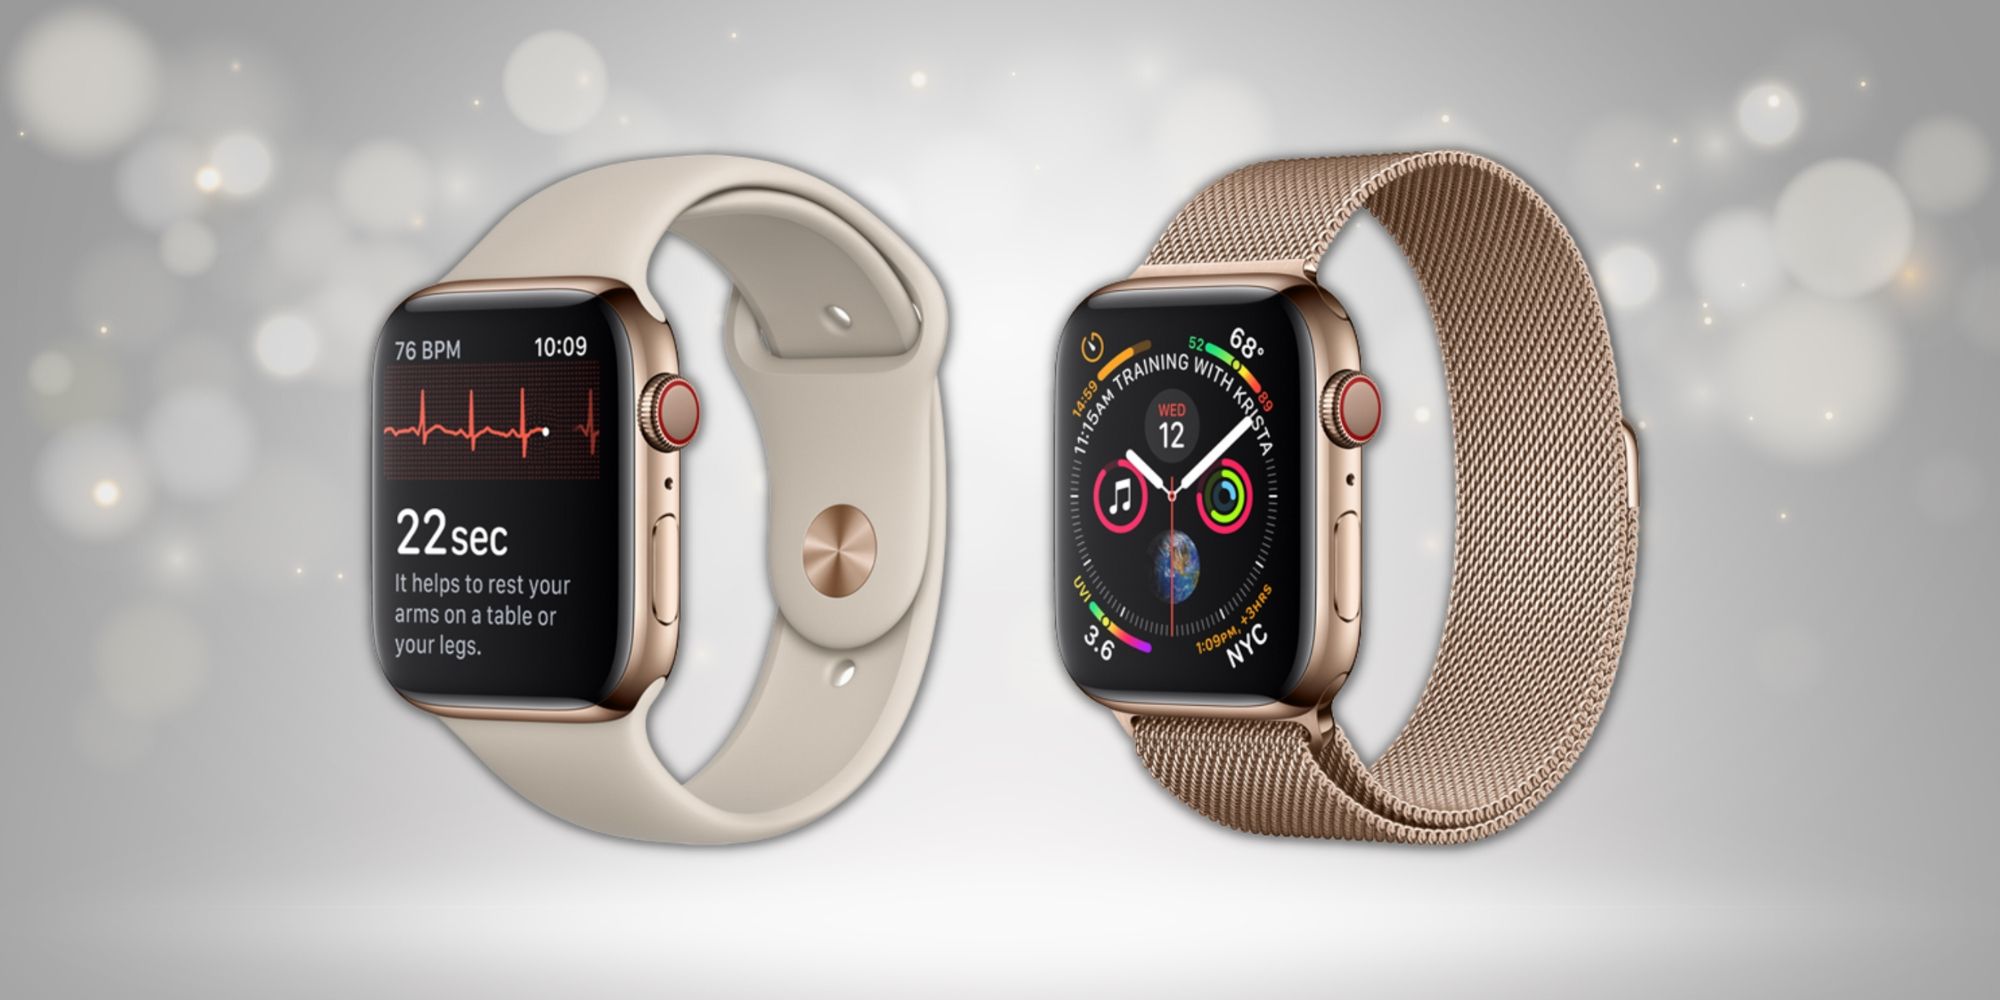 Apple Watch Series 4 in rose gold and metallic strap